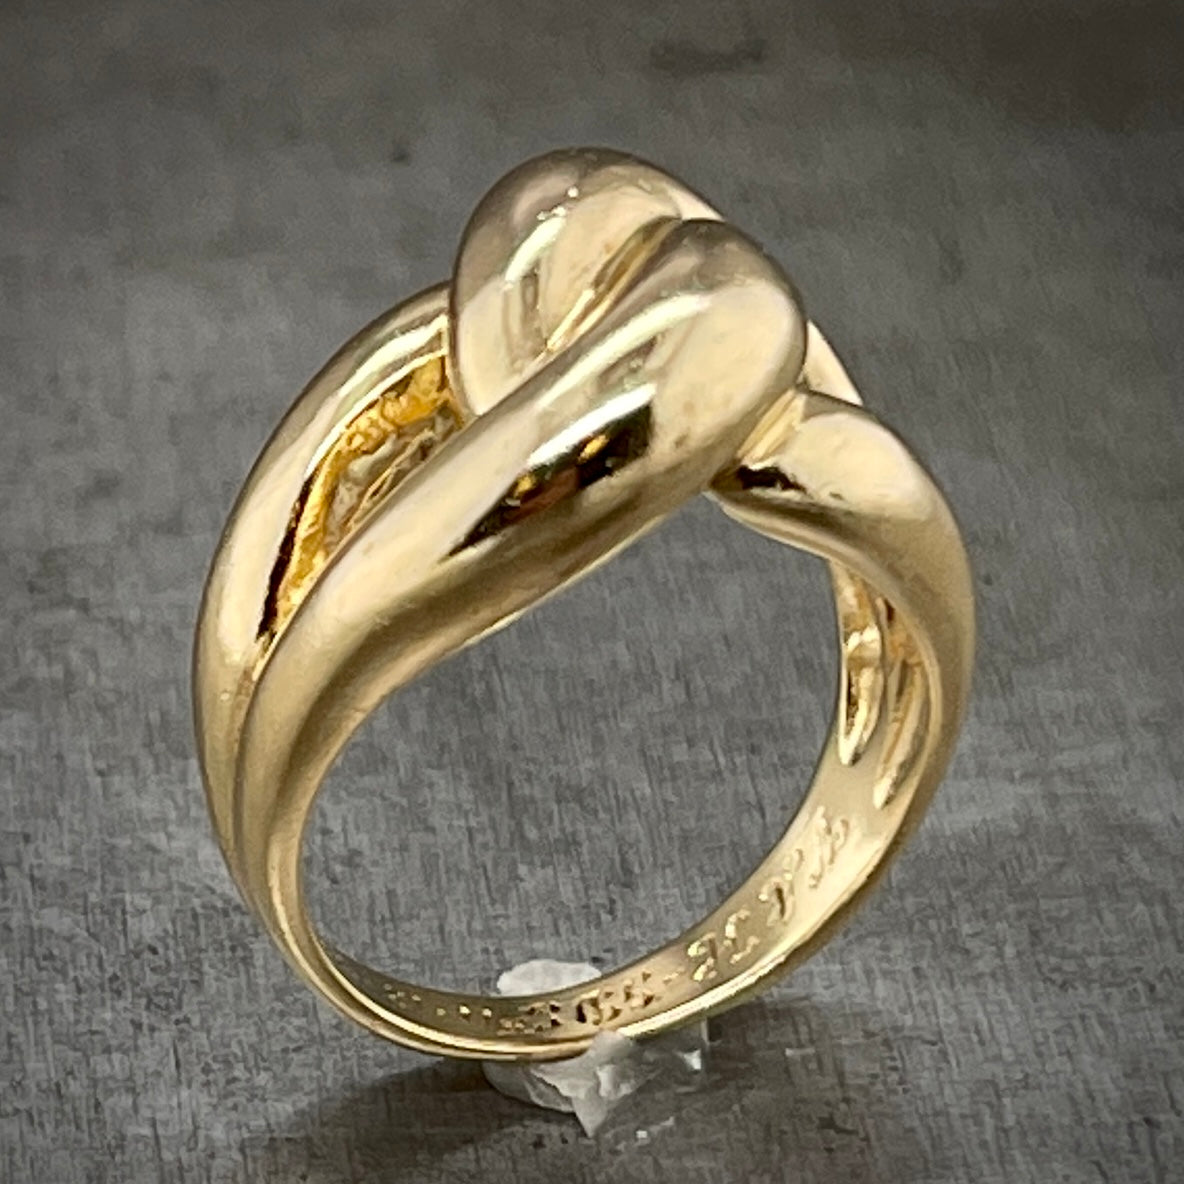 Aerial view of Knot Ring. Here you can better see the engraving on the inside band of the ring.